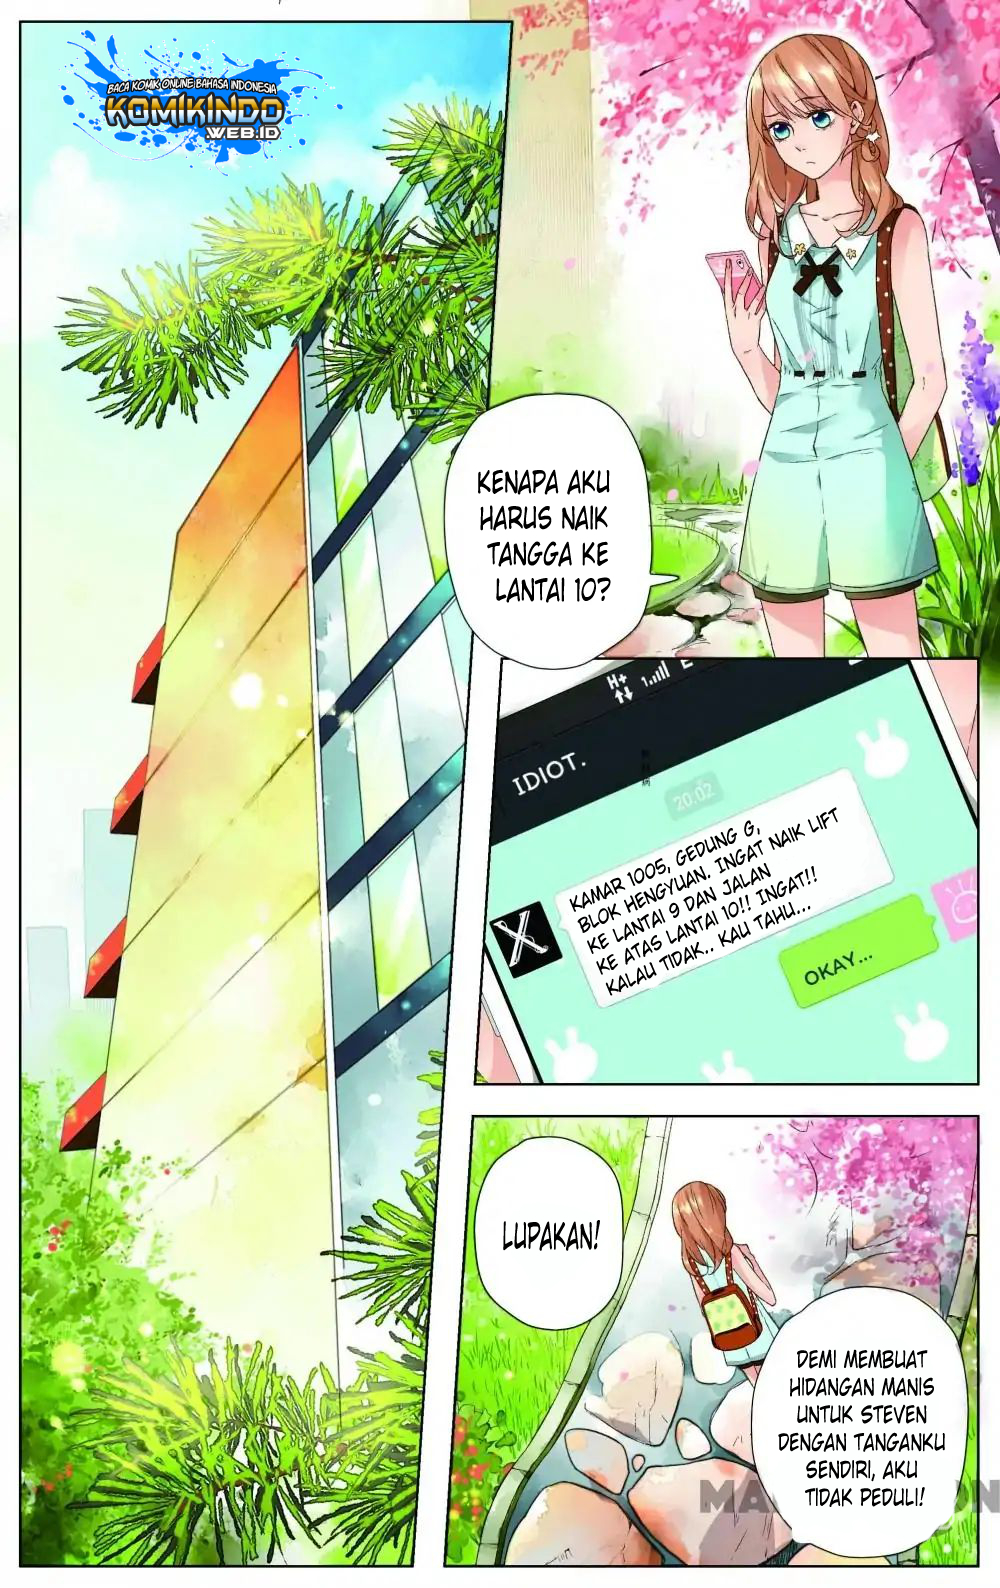 Love is a Cherry Color Chapter 08